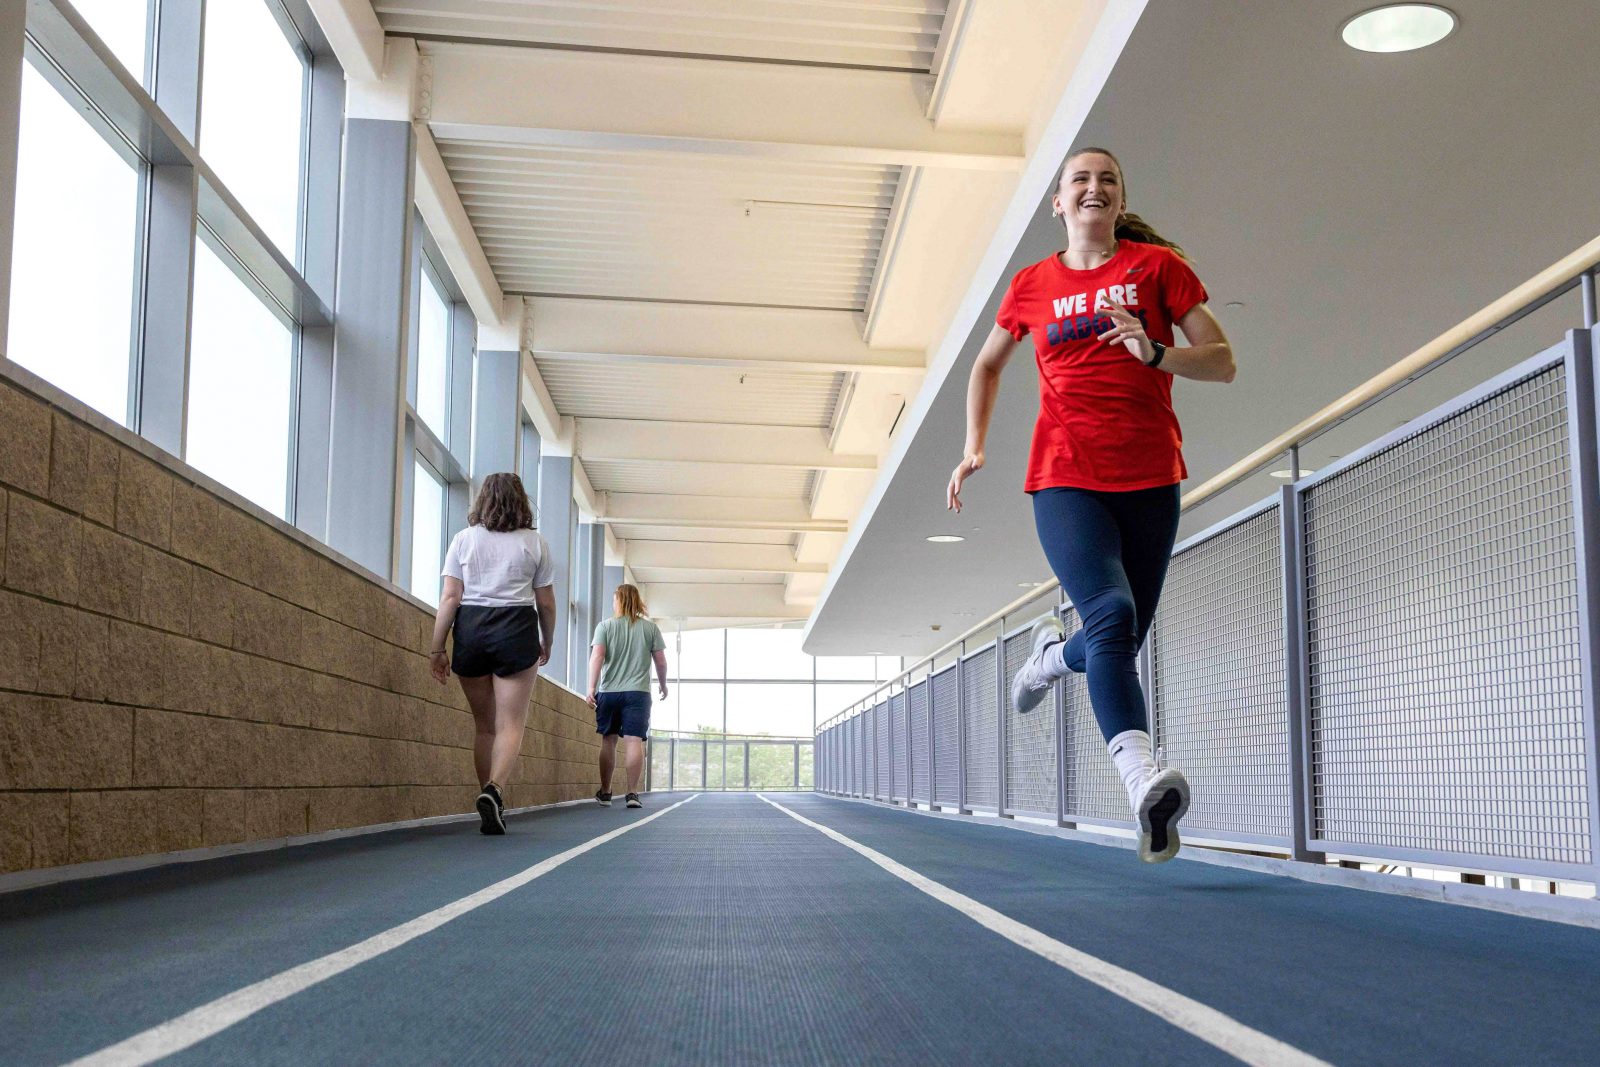 A woman in fitness attire runs on an indoor track while others walk.